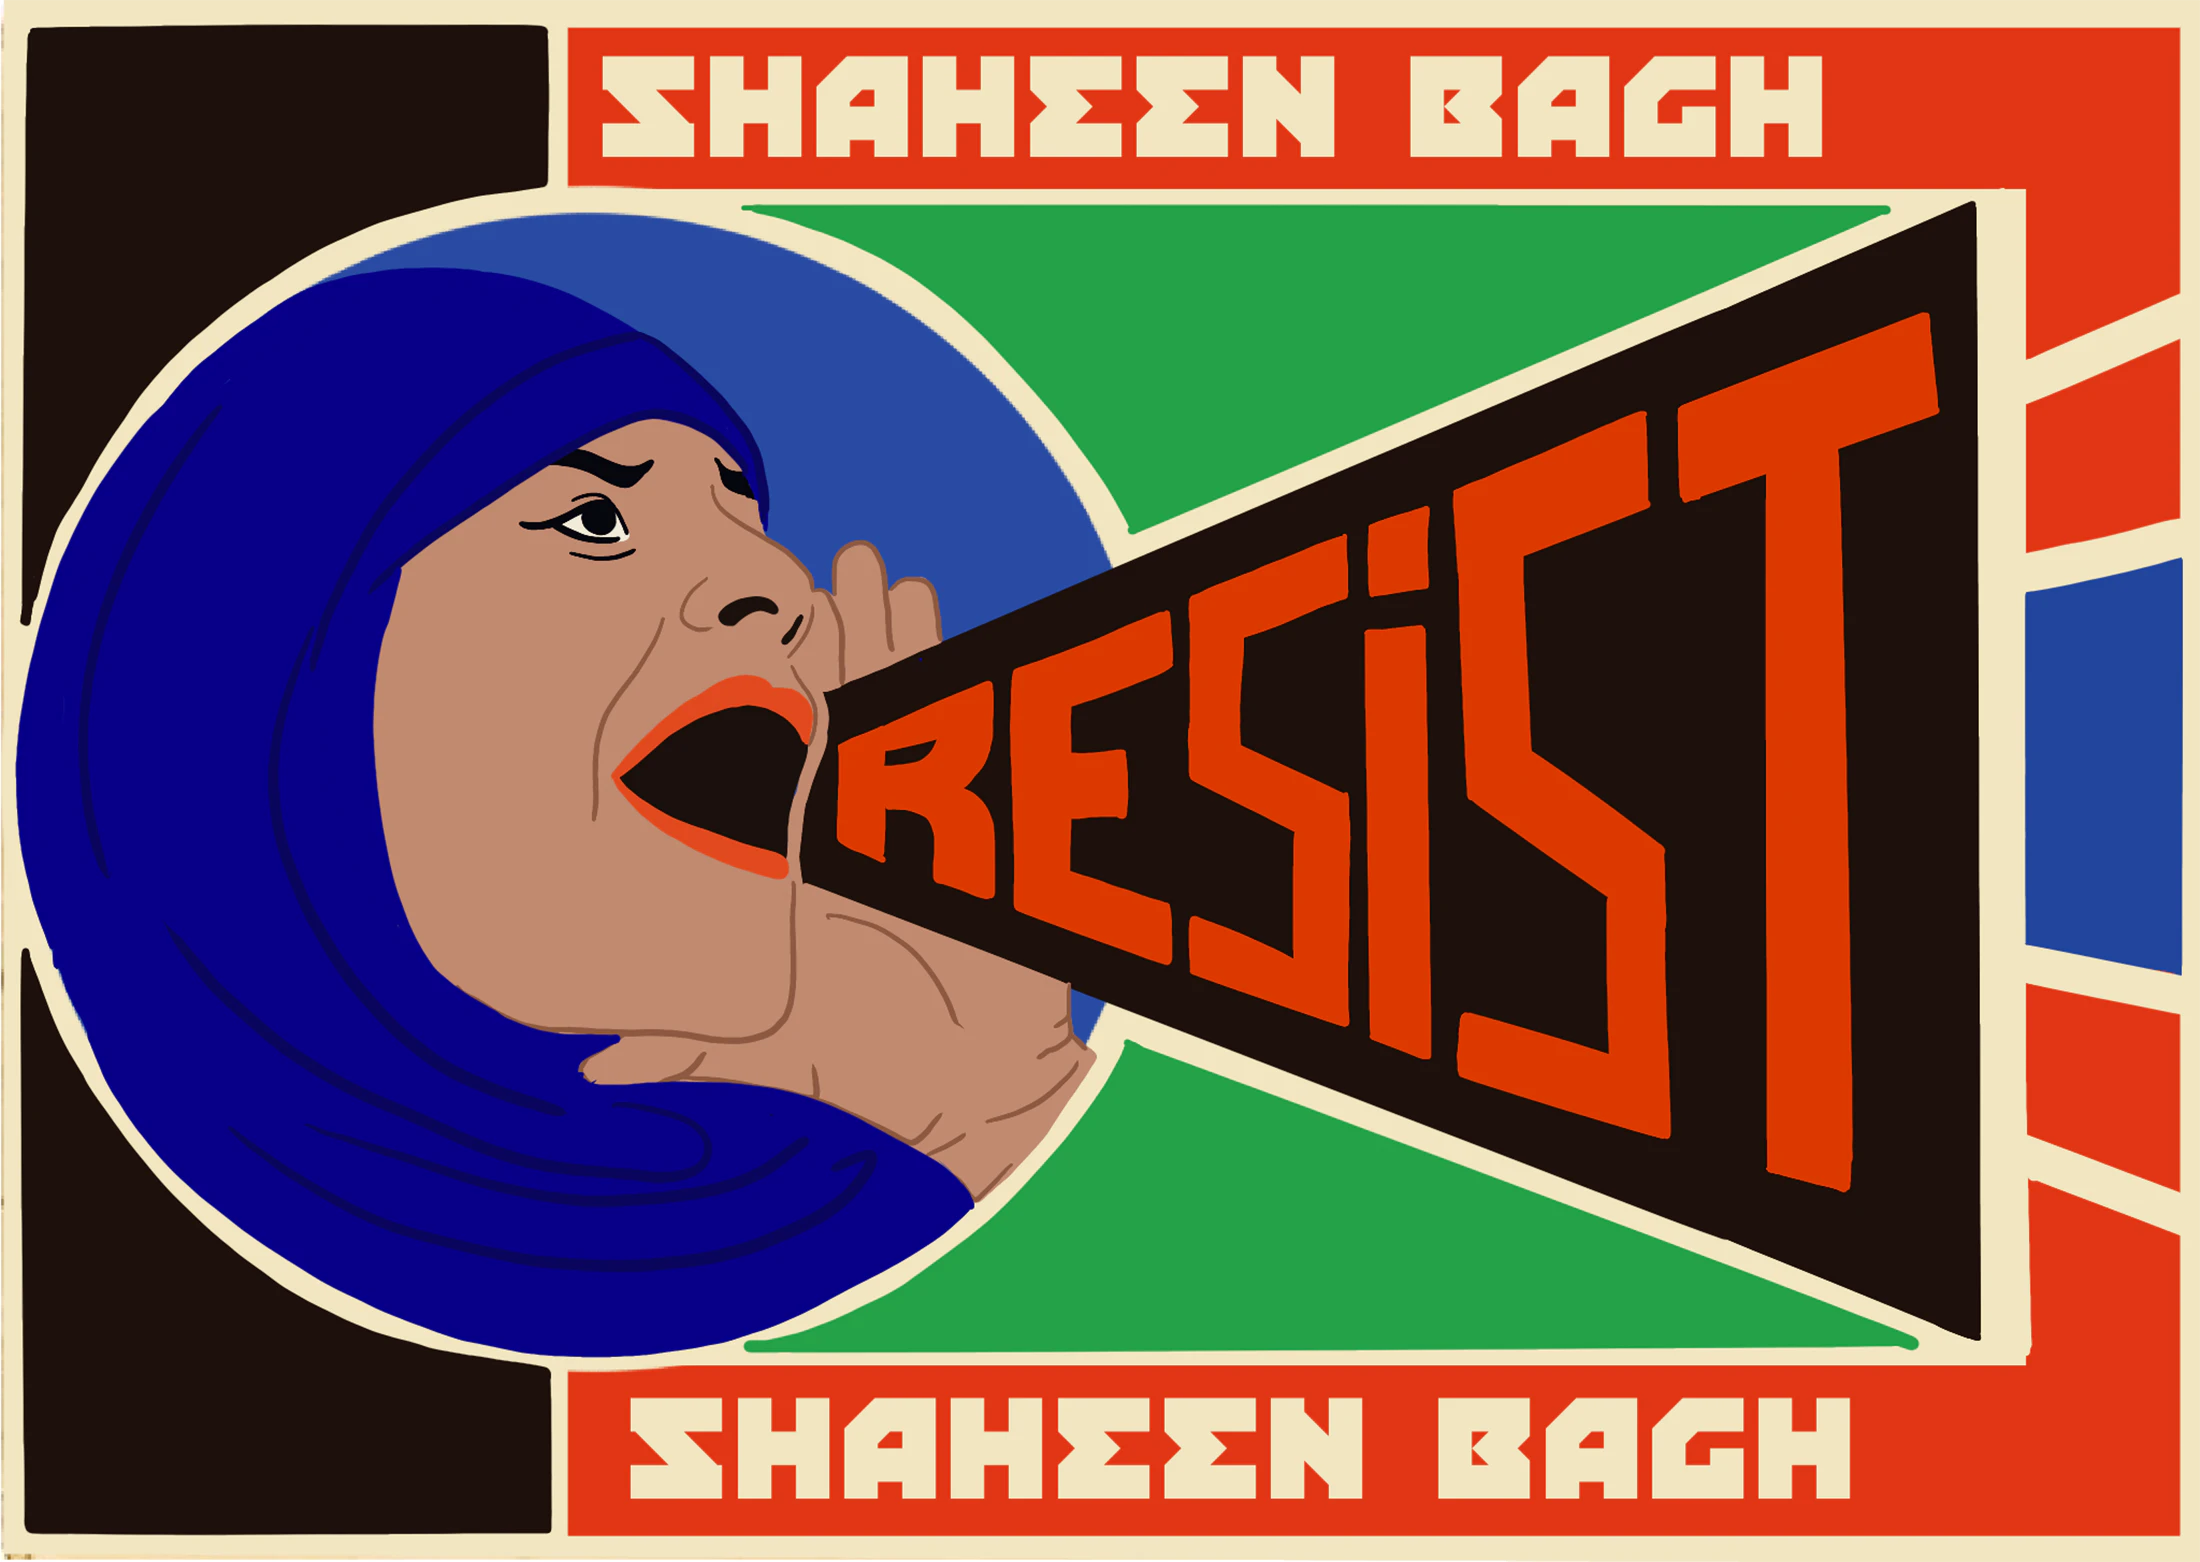 Shaheen Bagh Resistance